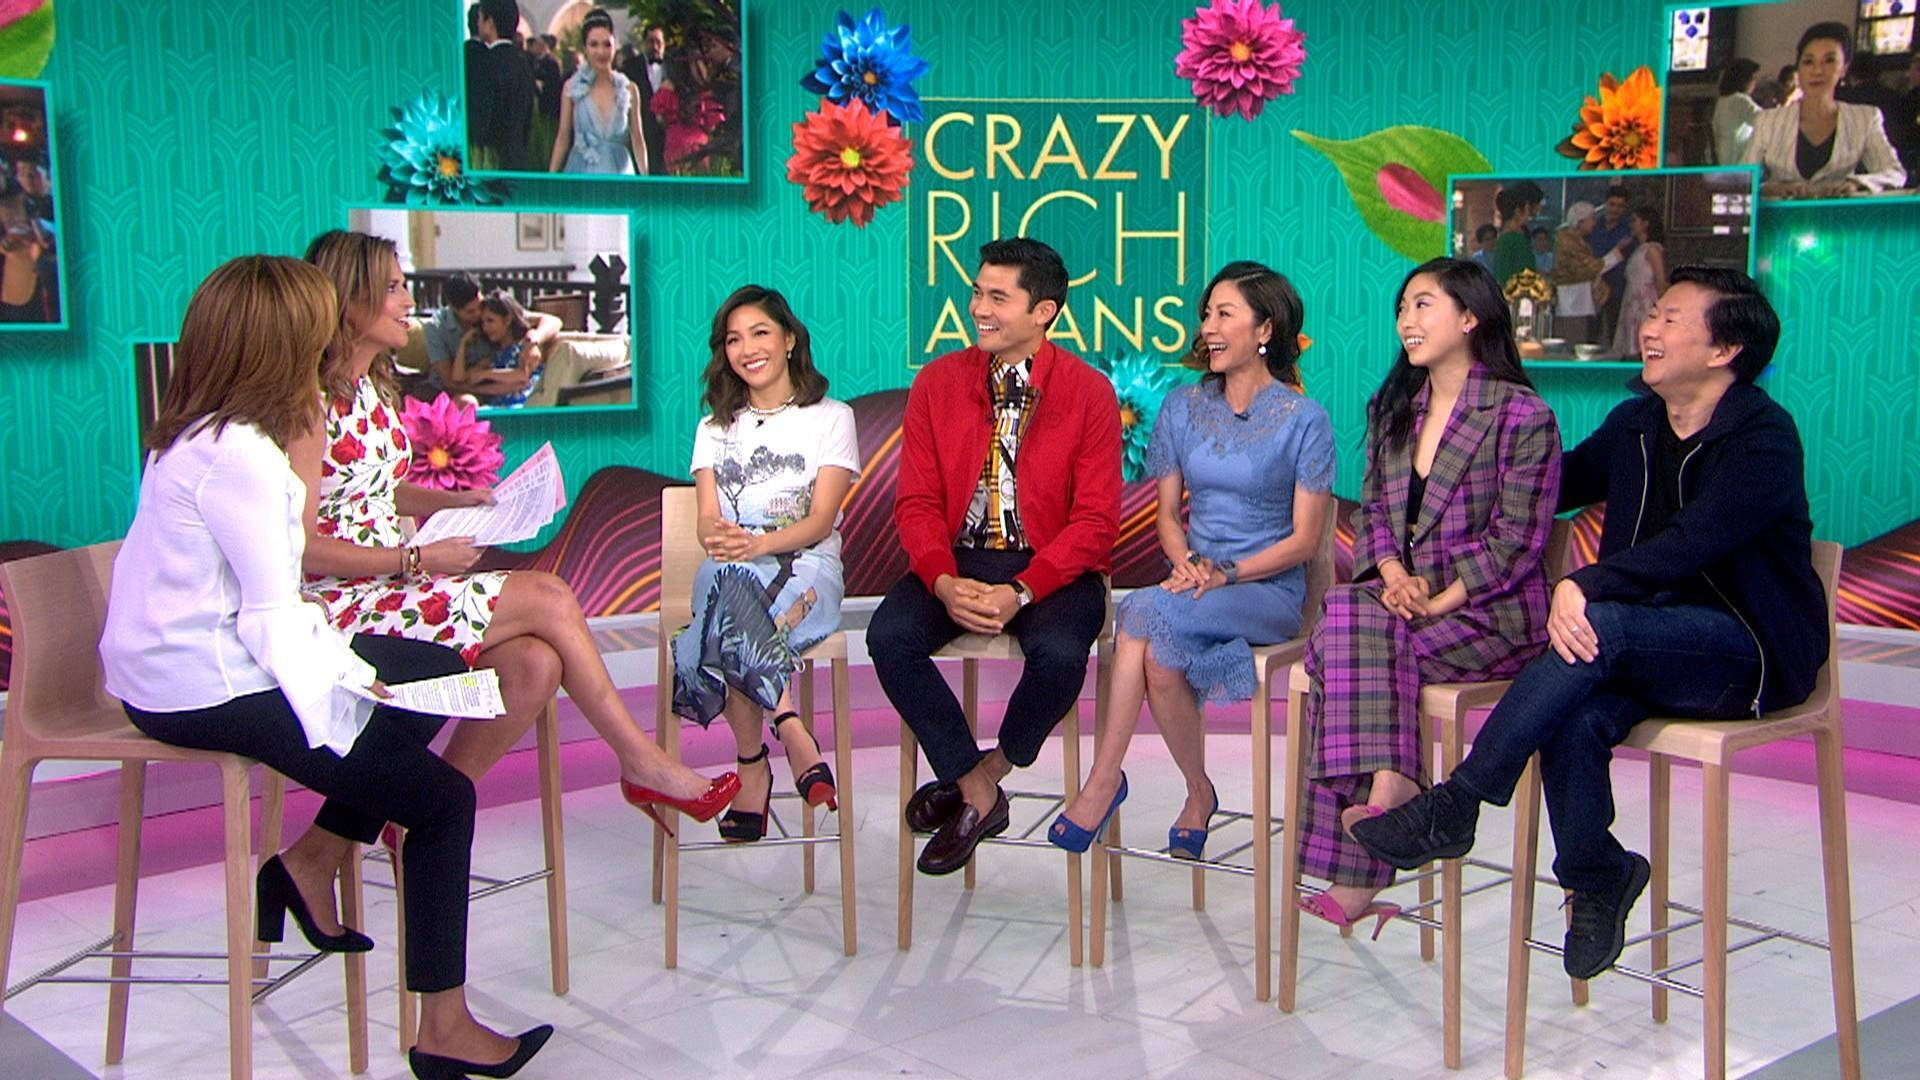 A Joyful Moment With Rachel And Nick From Crazy Rich Asians Movie